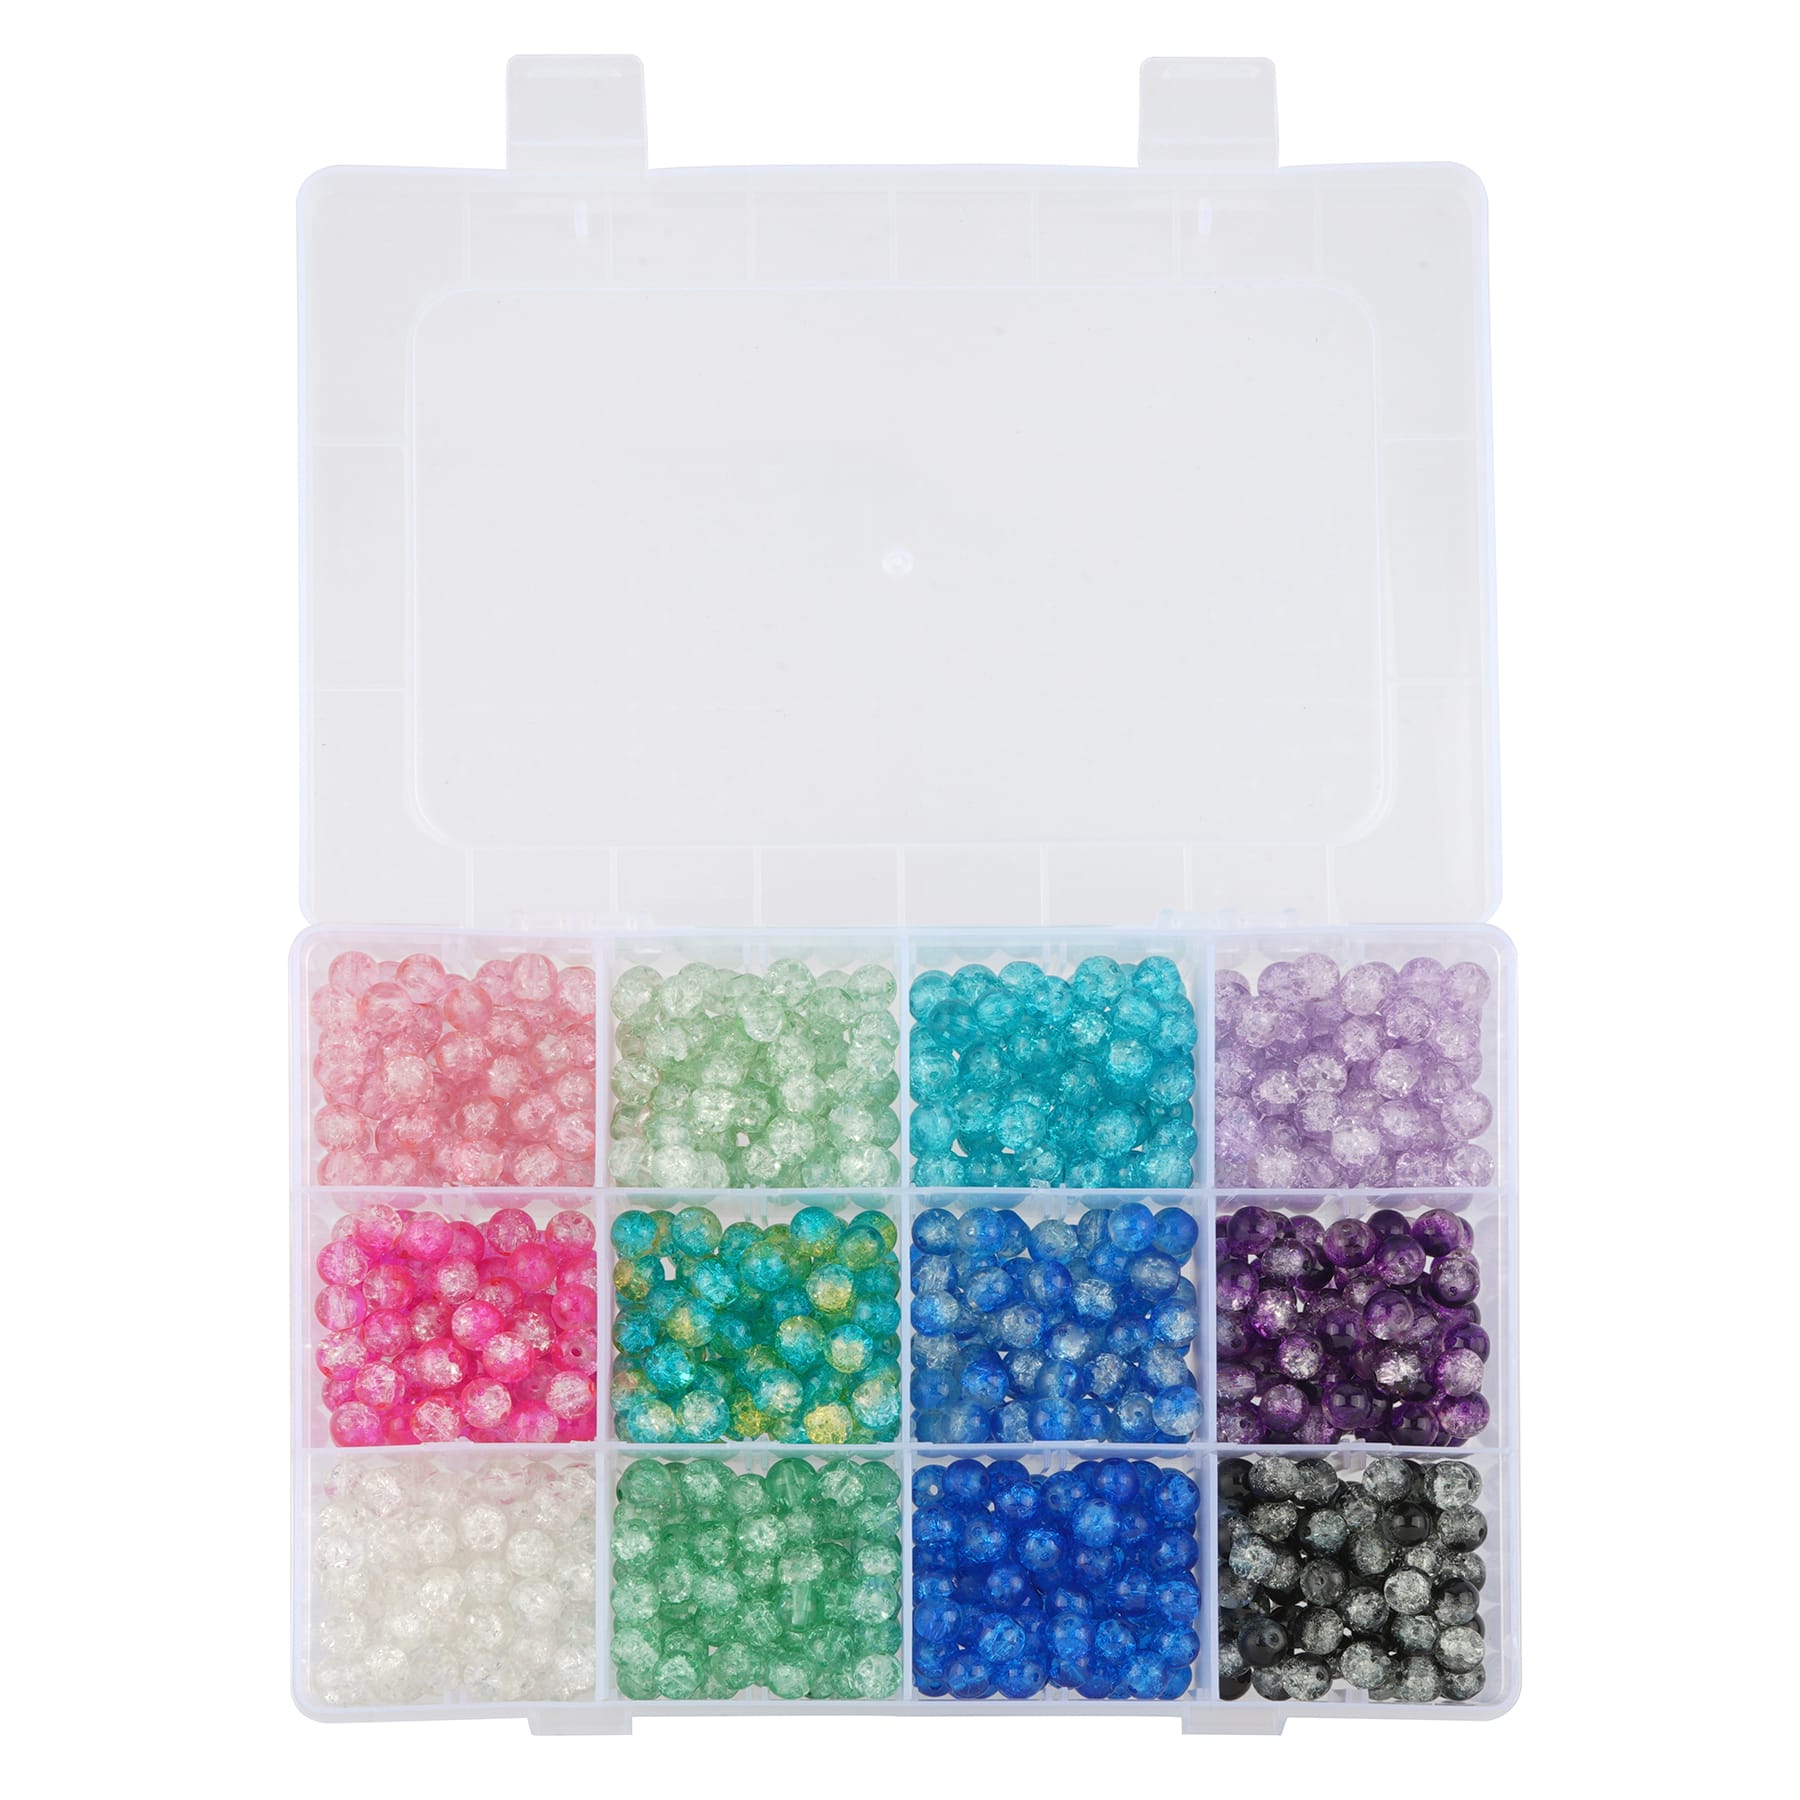 6 Packs: 960 ct. (5,760 total) Crackle Glass Beads, 8mm by Bead Landing&#x2122;